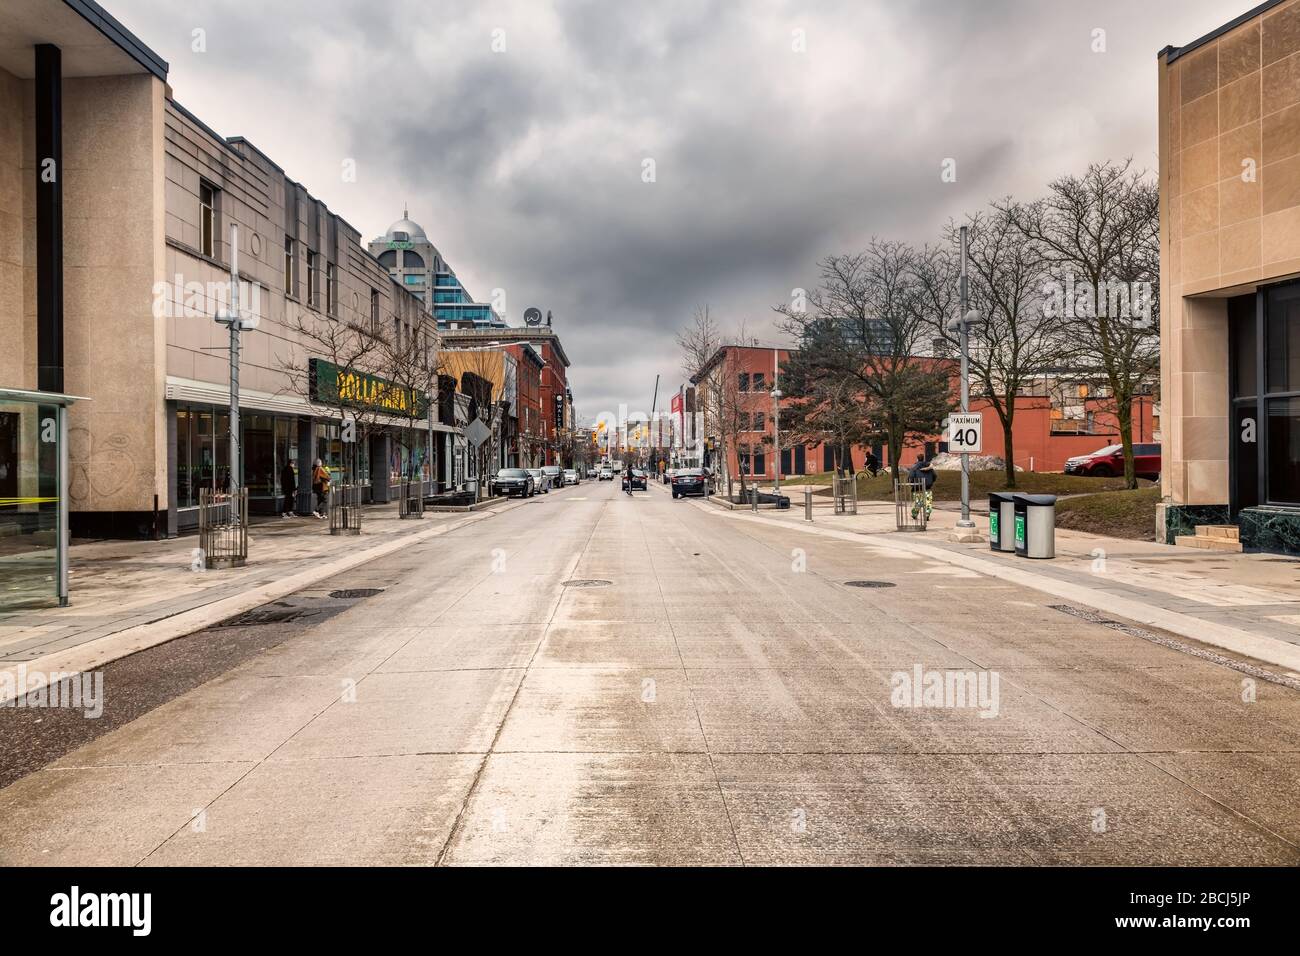 Kitchener, Ontario, Canada - March 20, 2020: View at the houses along King street located in downtown Kitchener, Ontario, Canada Stock Photo